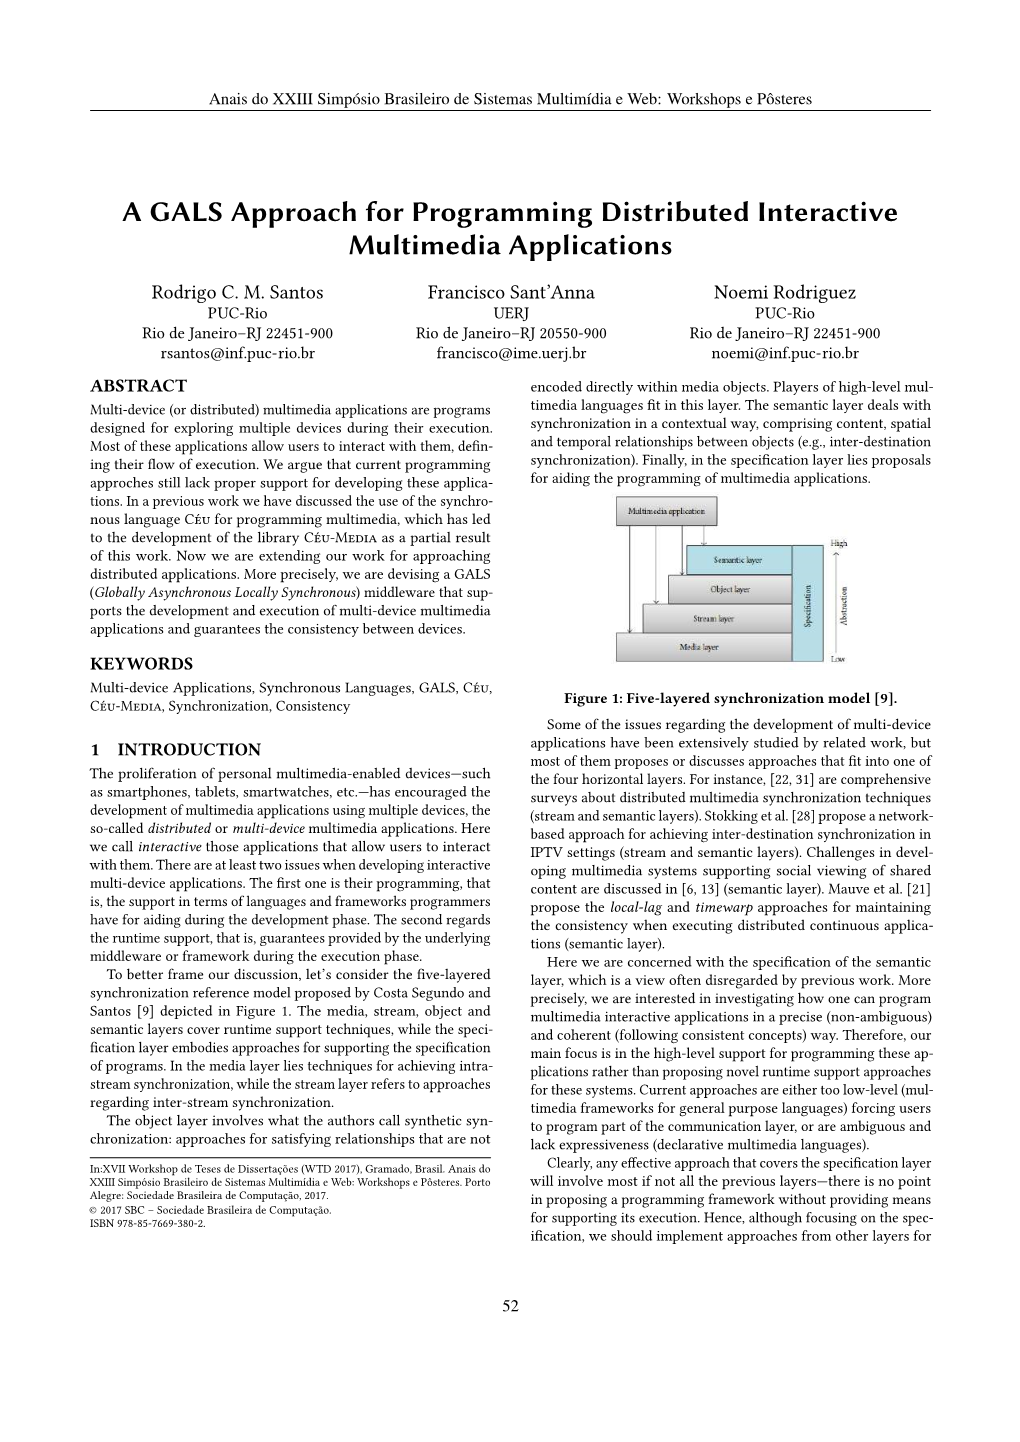 A GALS Approach for Programming Distributed Interactive Multimedia Applications